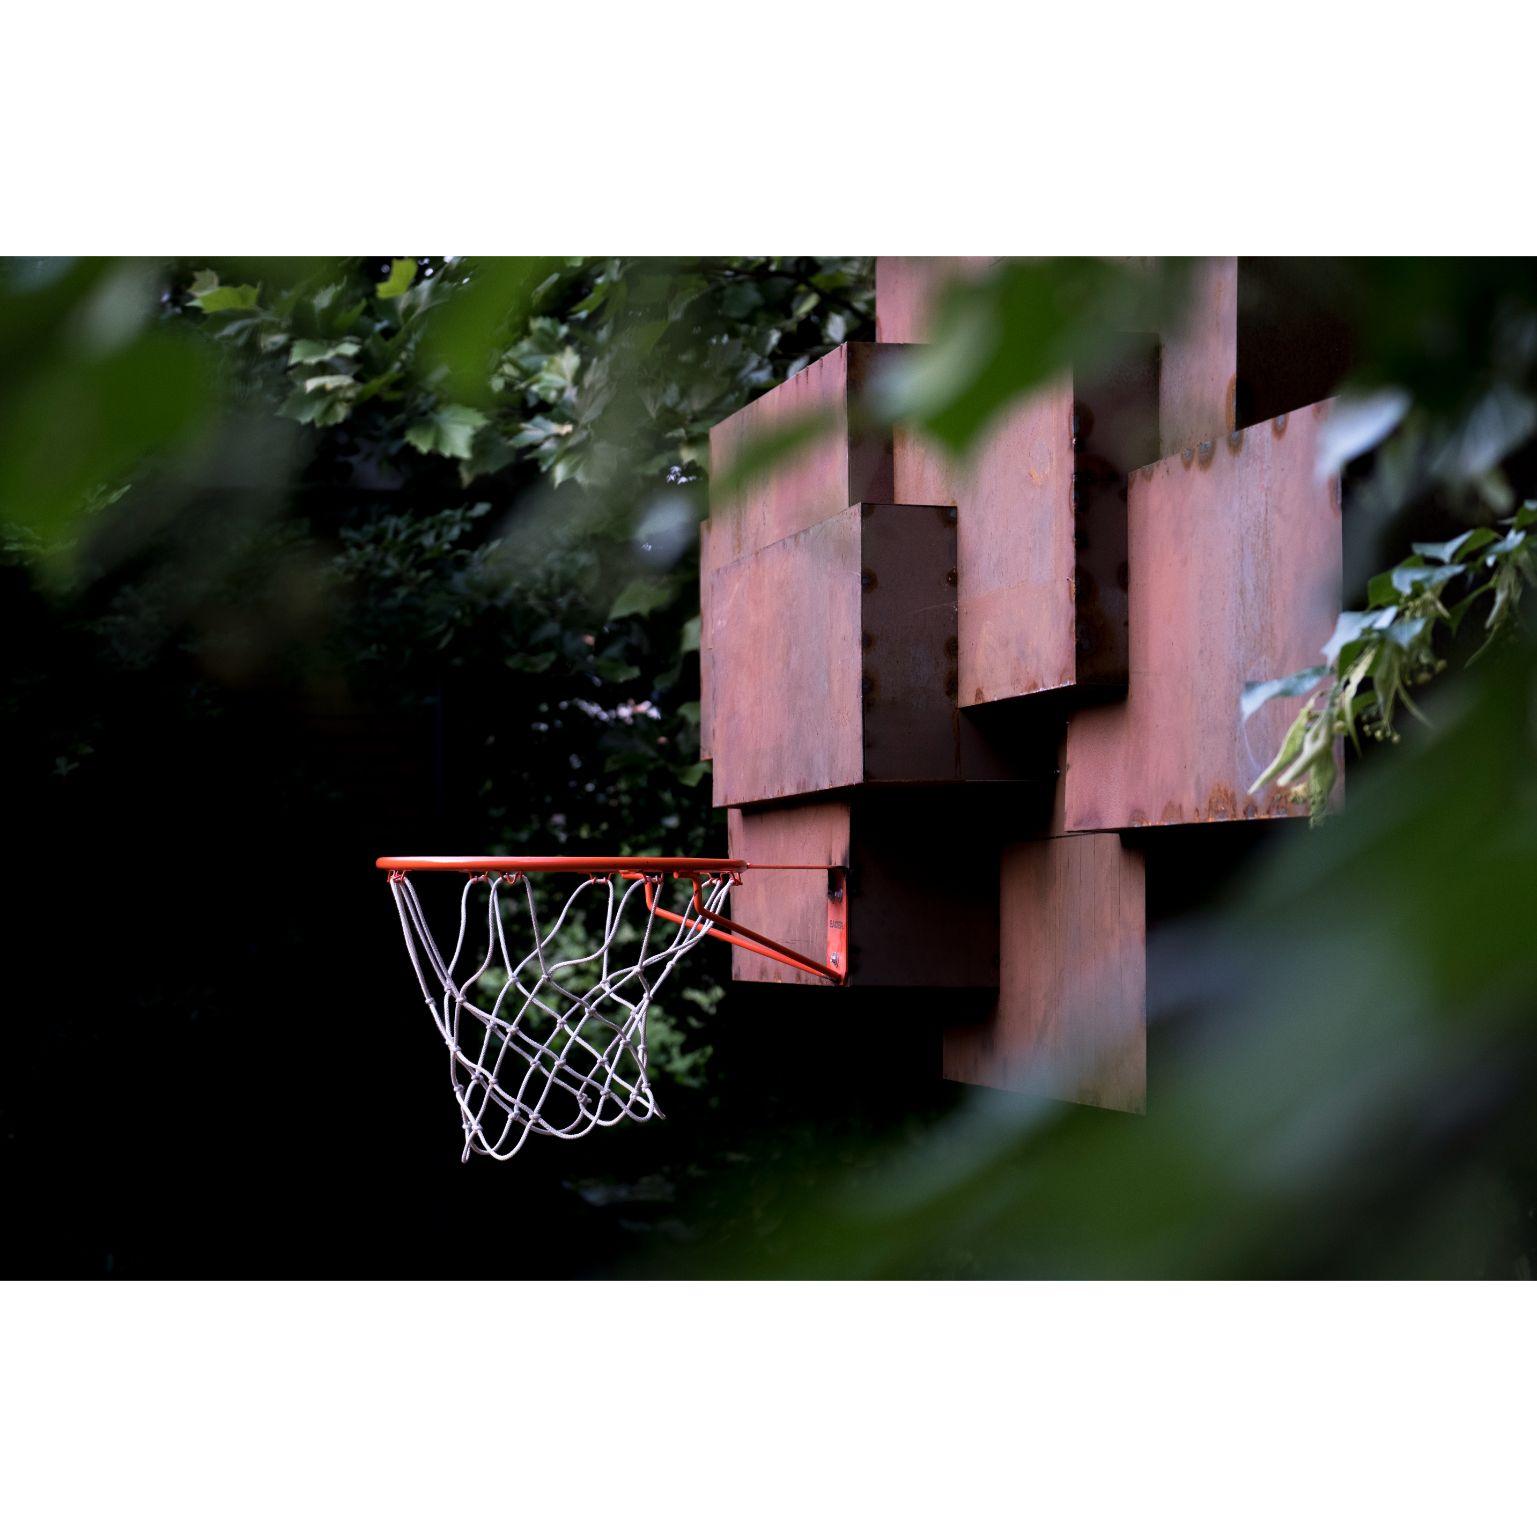 Rusted dreams - sculpture by Atelier Haute Cuisine
Dimensions: 200 x 200 cm
Materials: Iron

Atelier Haute Cuisine transformed an old swimming pool into a basketball court with a twist. 